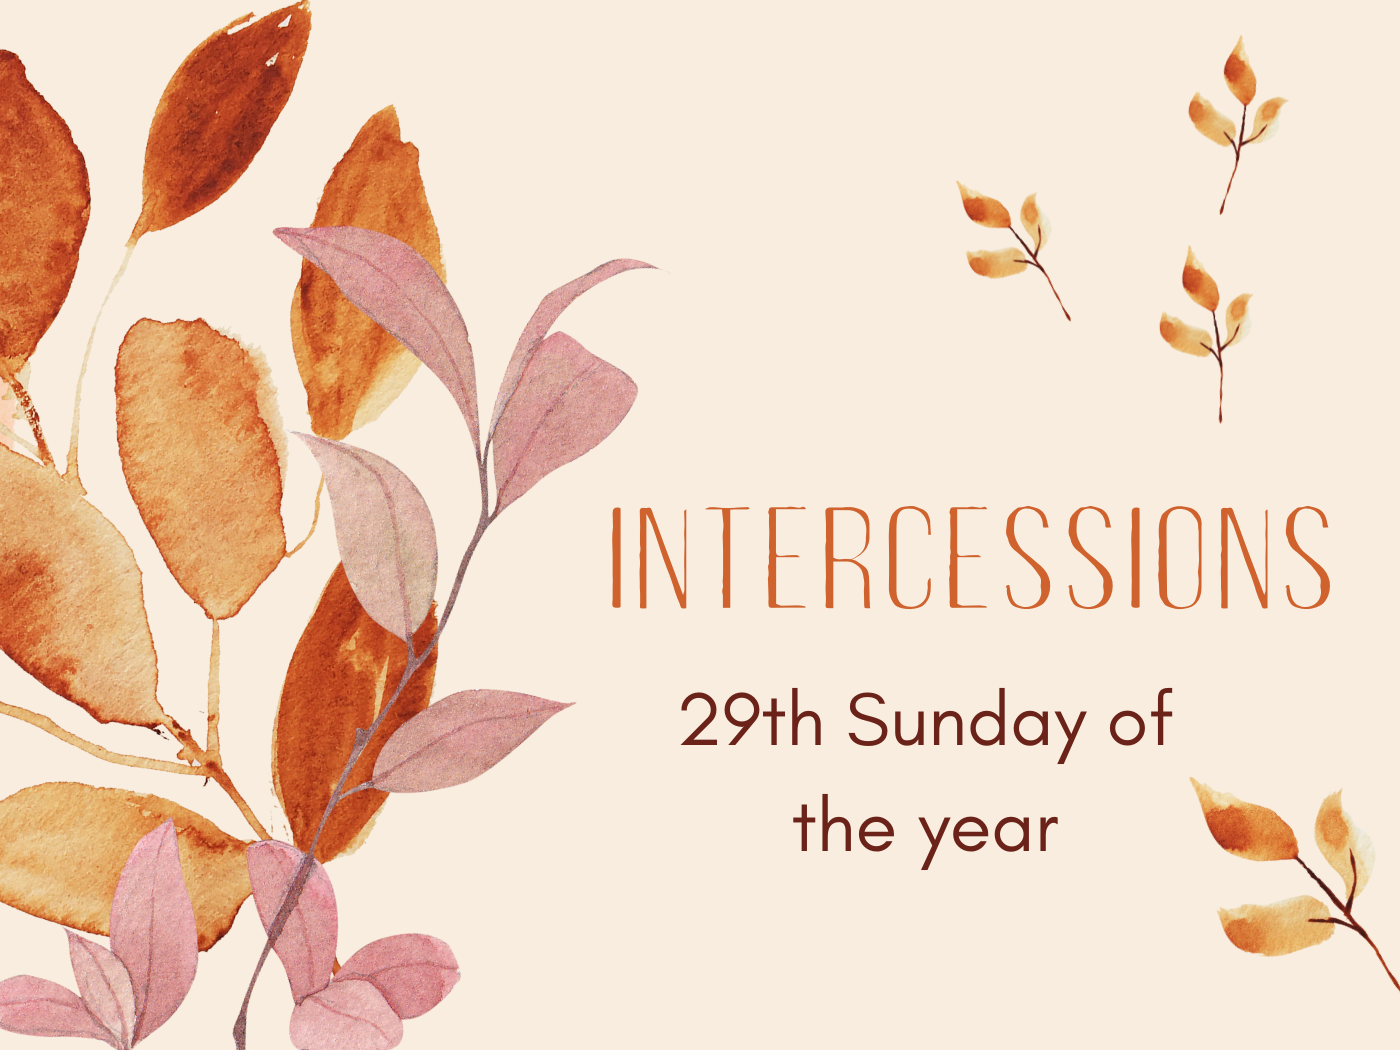 Download prayers of intercession for the 29th Sunday of the year